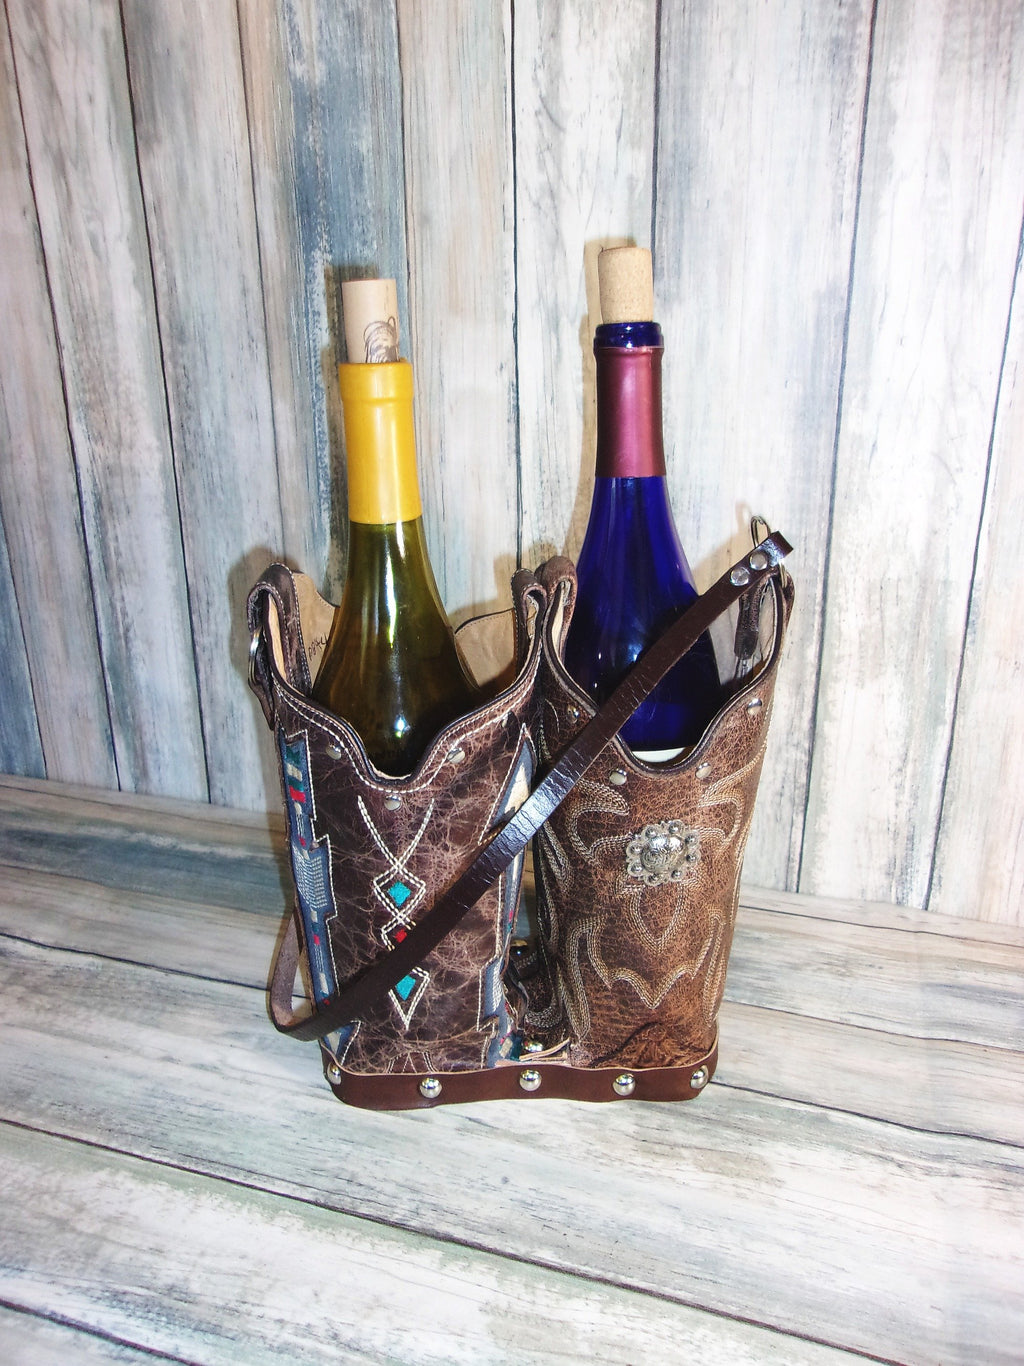 Double Wine Tote Bag - Leather Wine Carrier - Wine Lovers Gift – Wine Bag PP44 cowboy boot purses, western fringe purse, handmade leather purses, boot purse, handmade western purse, custom leather handbags Chris Thompson Bags